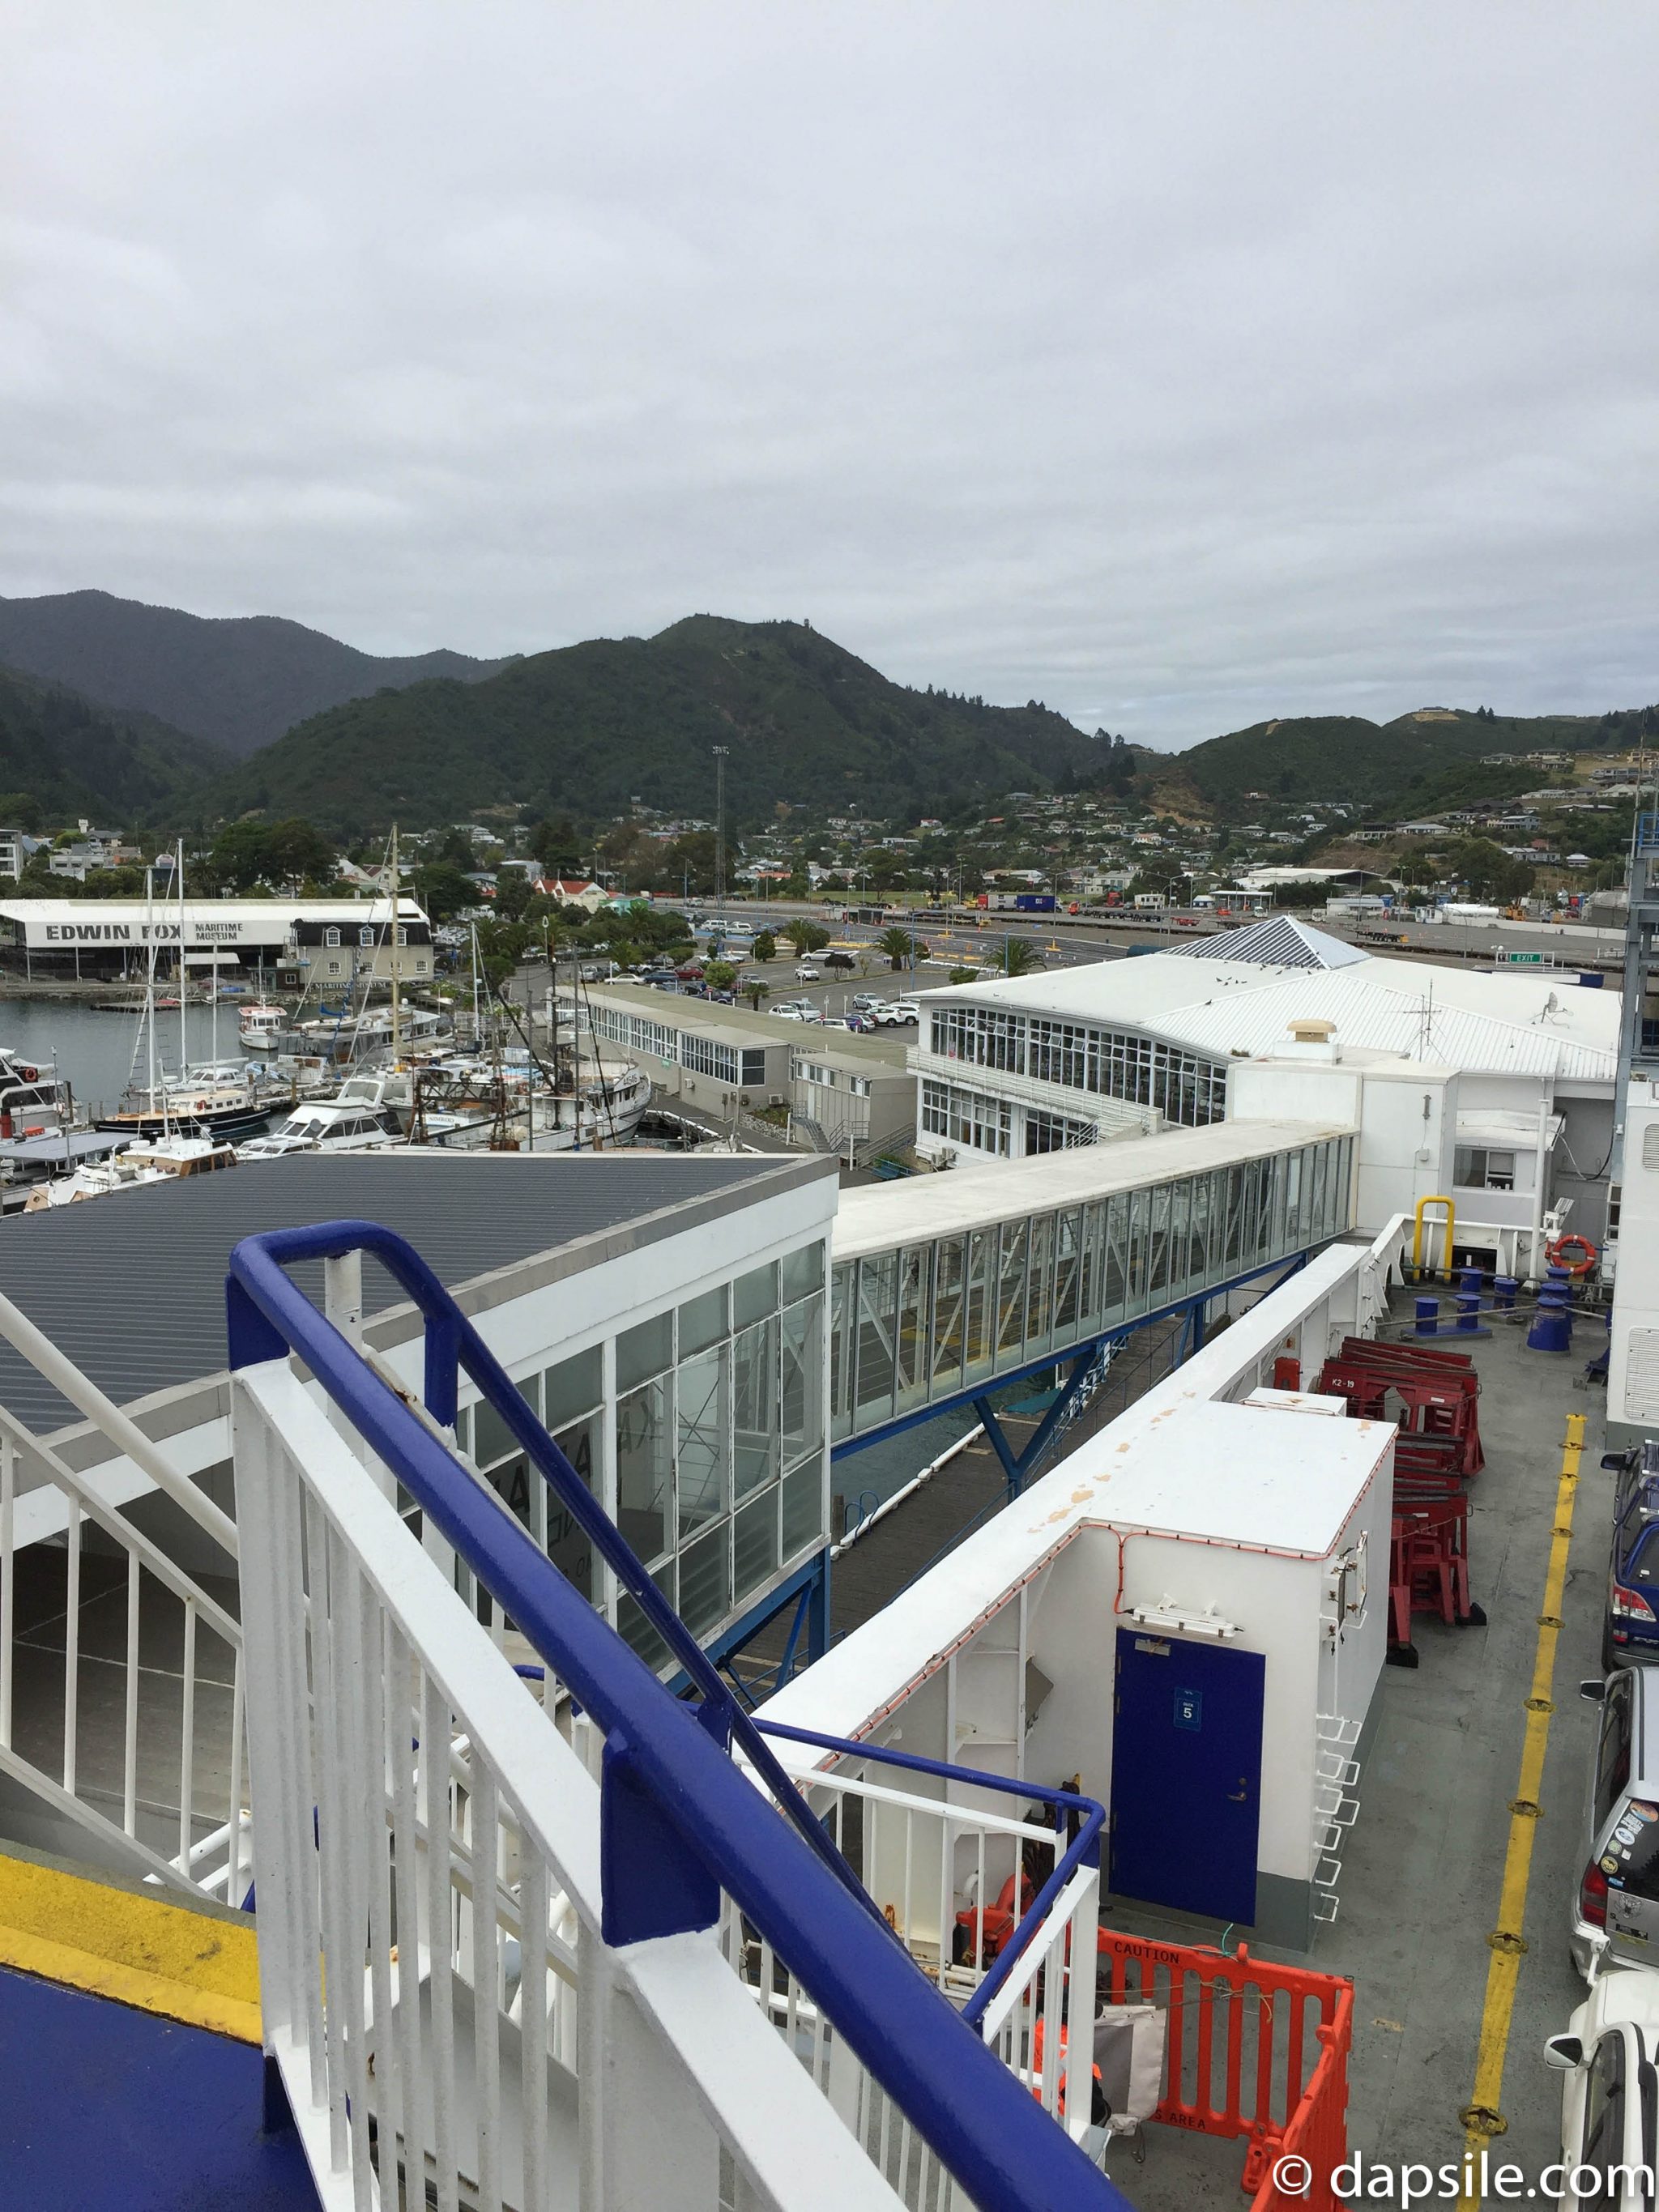 View of Ferry Terminal and part of Picton from the Ferry when driving from Christchurch to Wellington